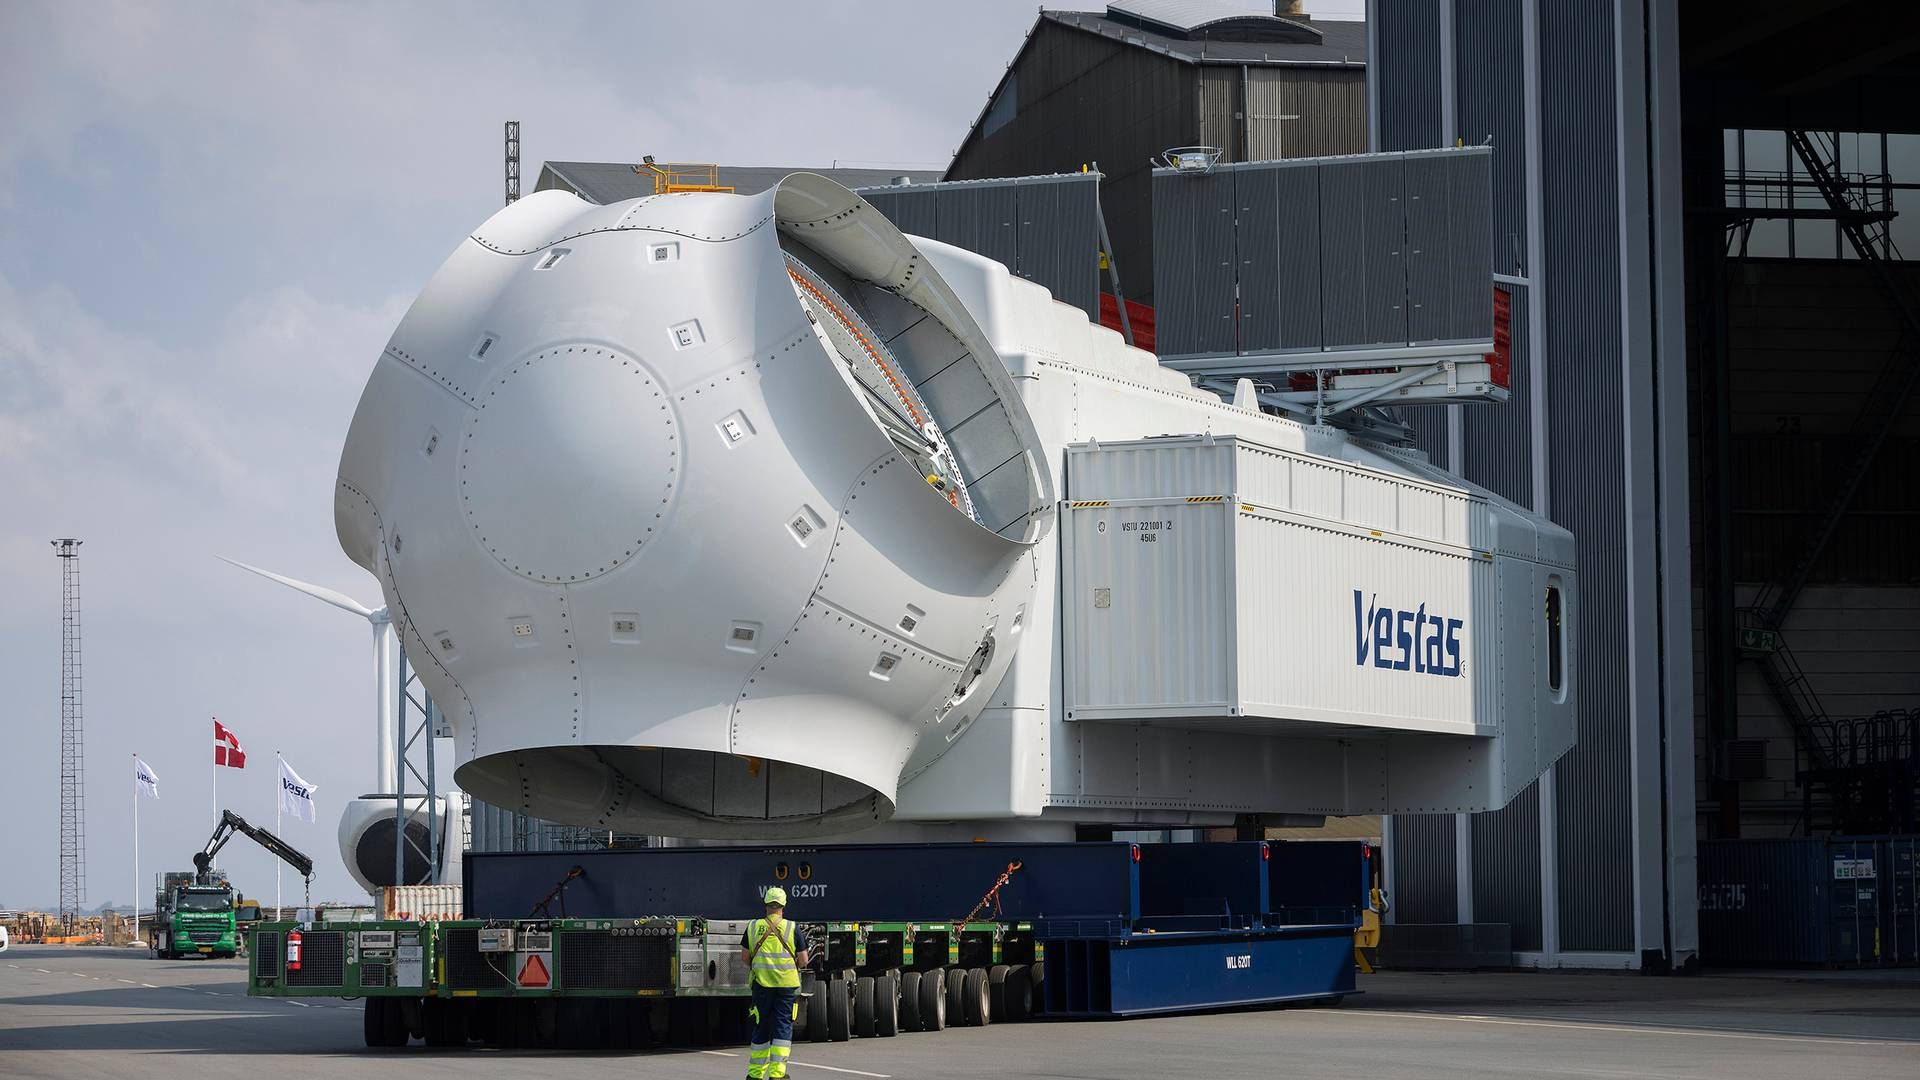 Vestas has primarily been known as a manufacturer of wind turbines - here, the upcoming V236 offshore wind turbine | Photo: vestas